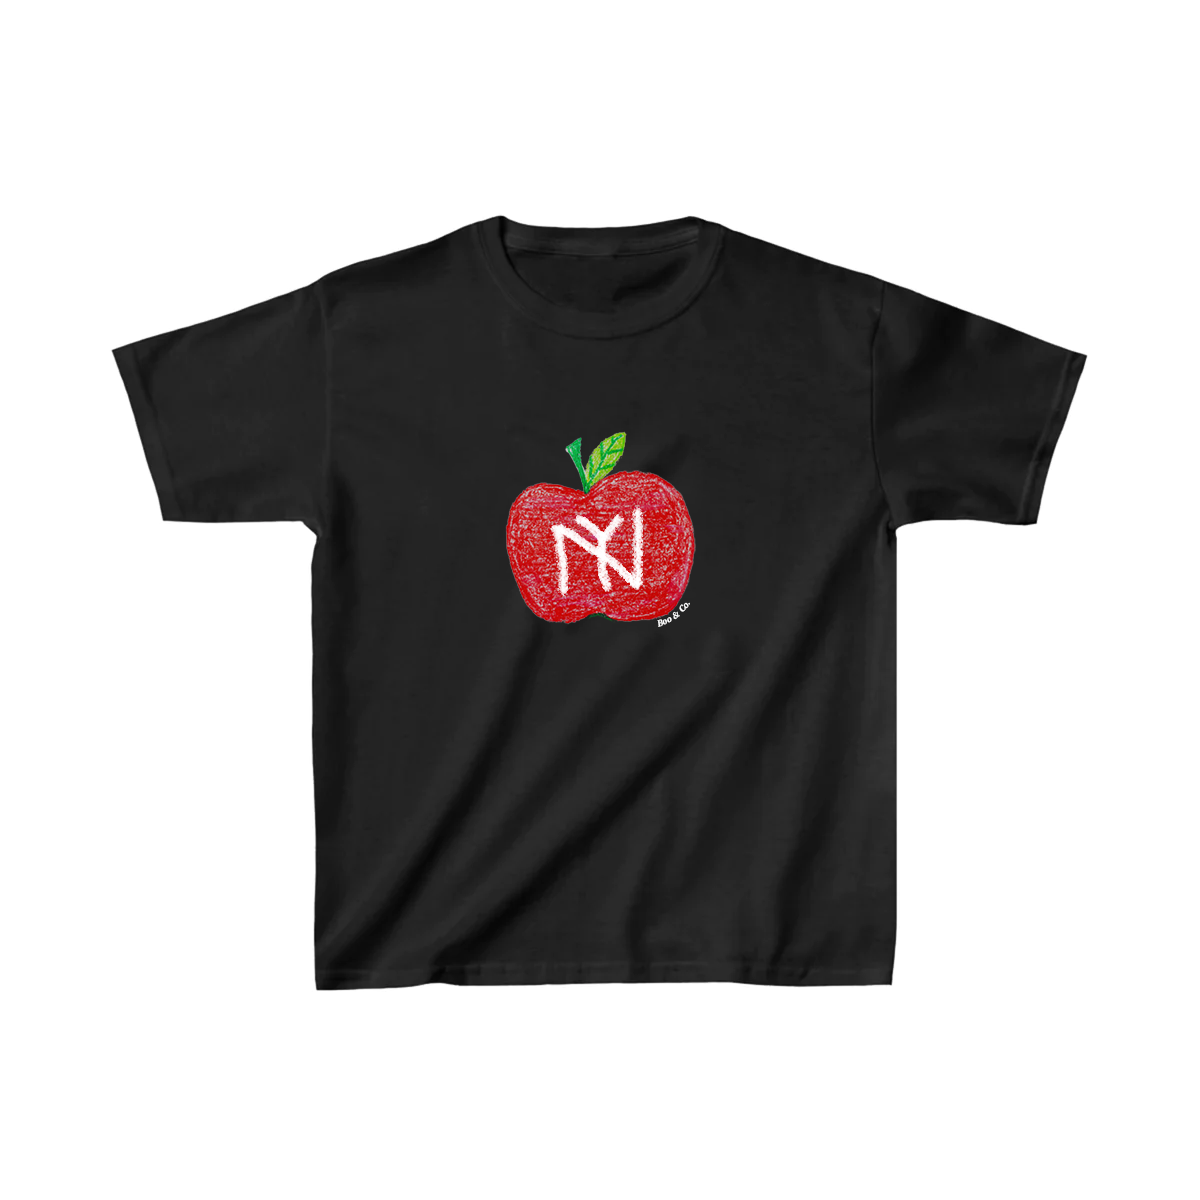 The Big Apple Short-Fit Tee